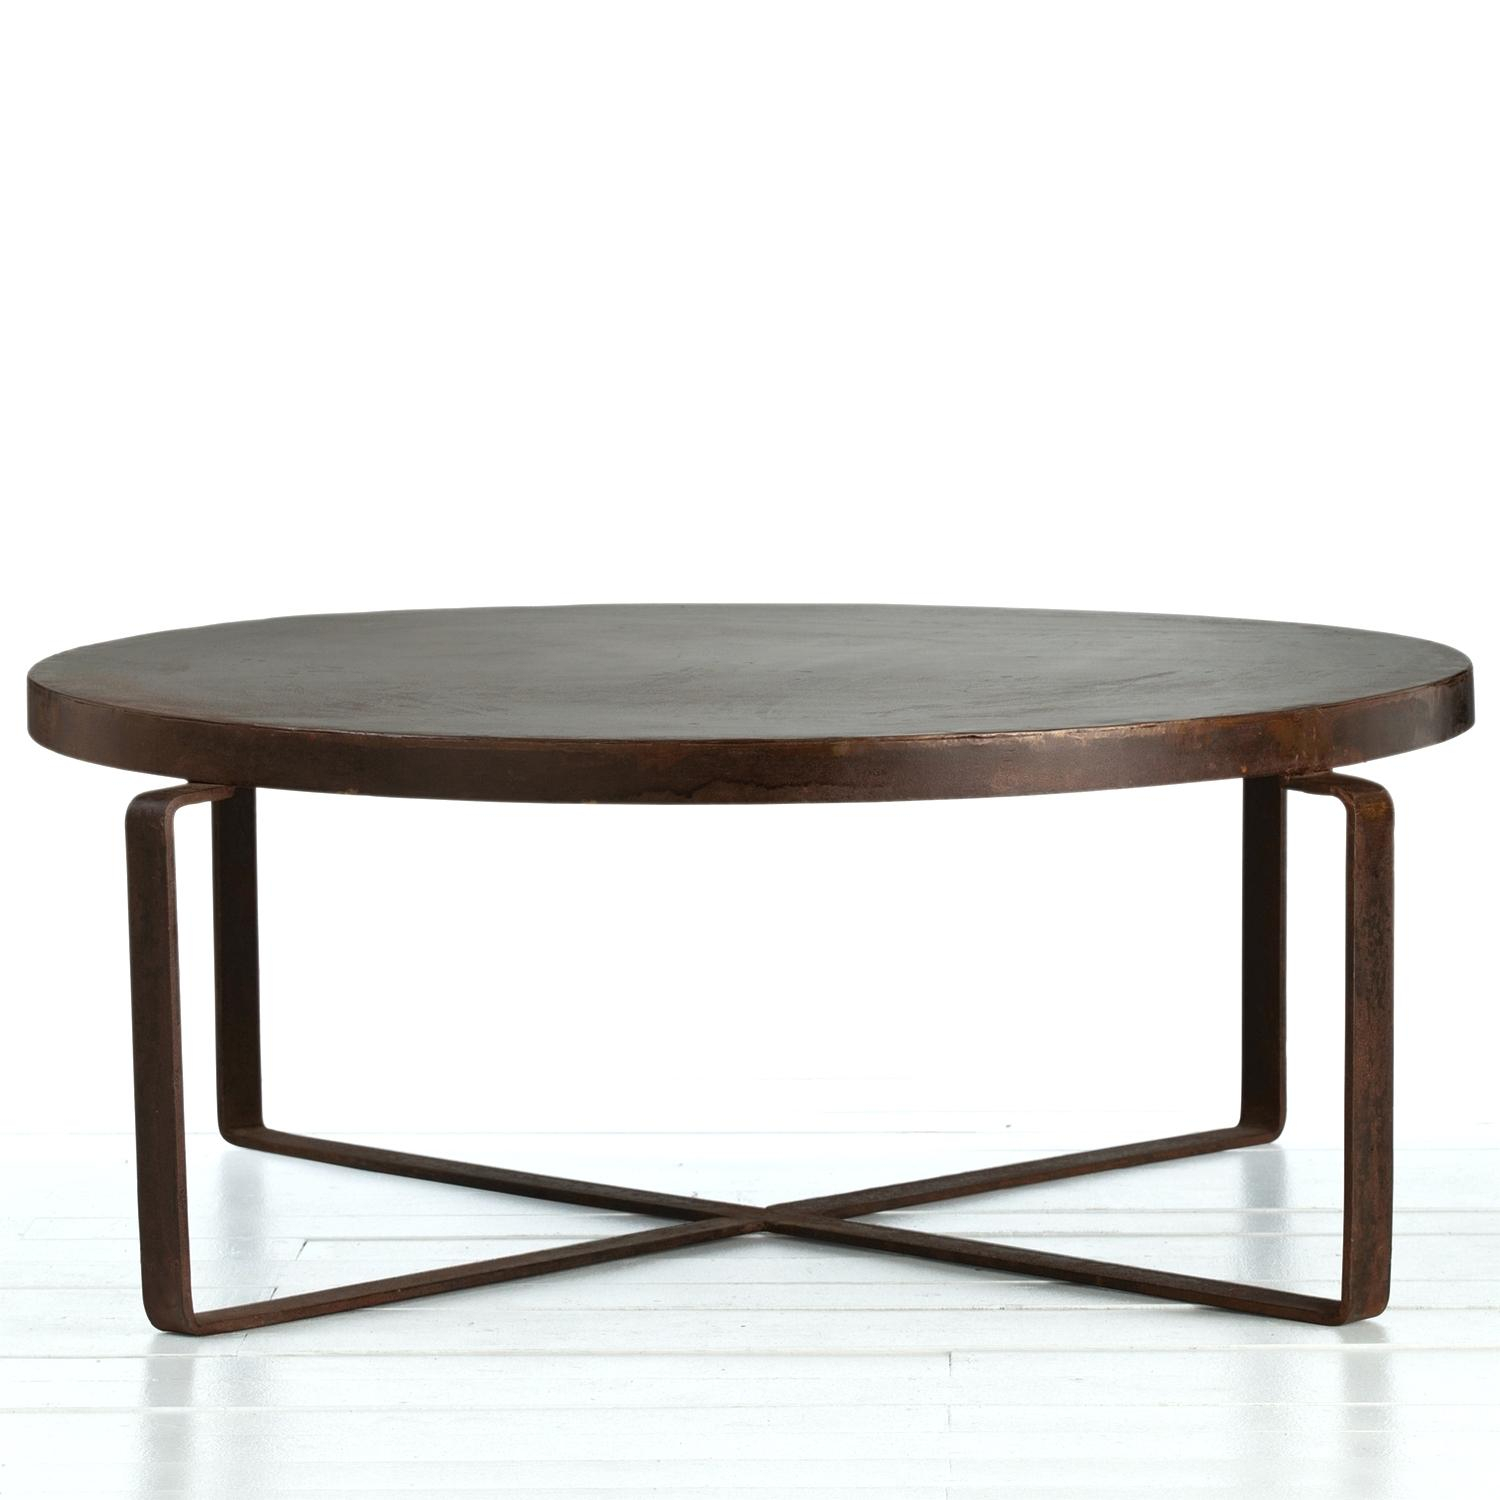 Origami Coffee Table West Elm 9 West Elm Round Coffee Table Photos